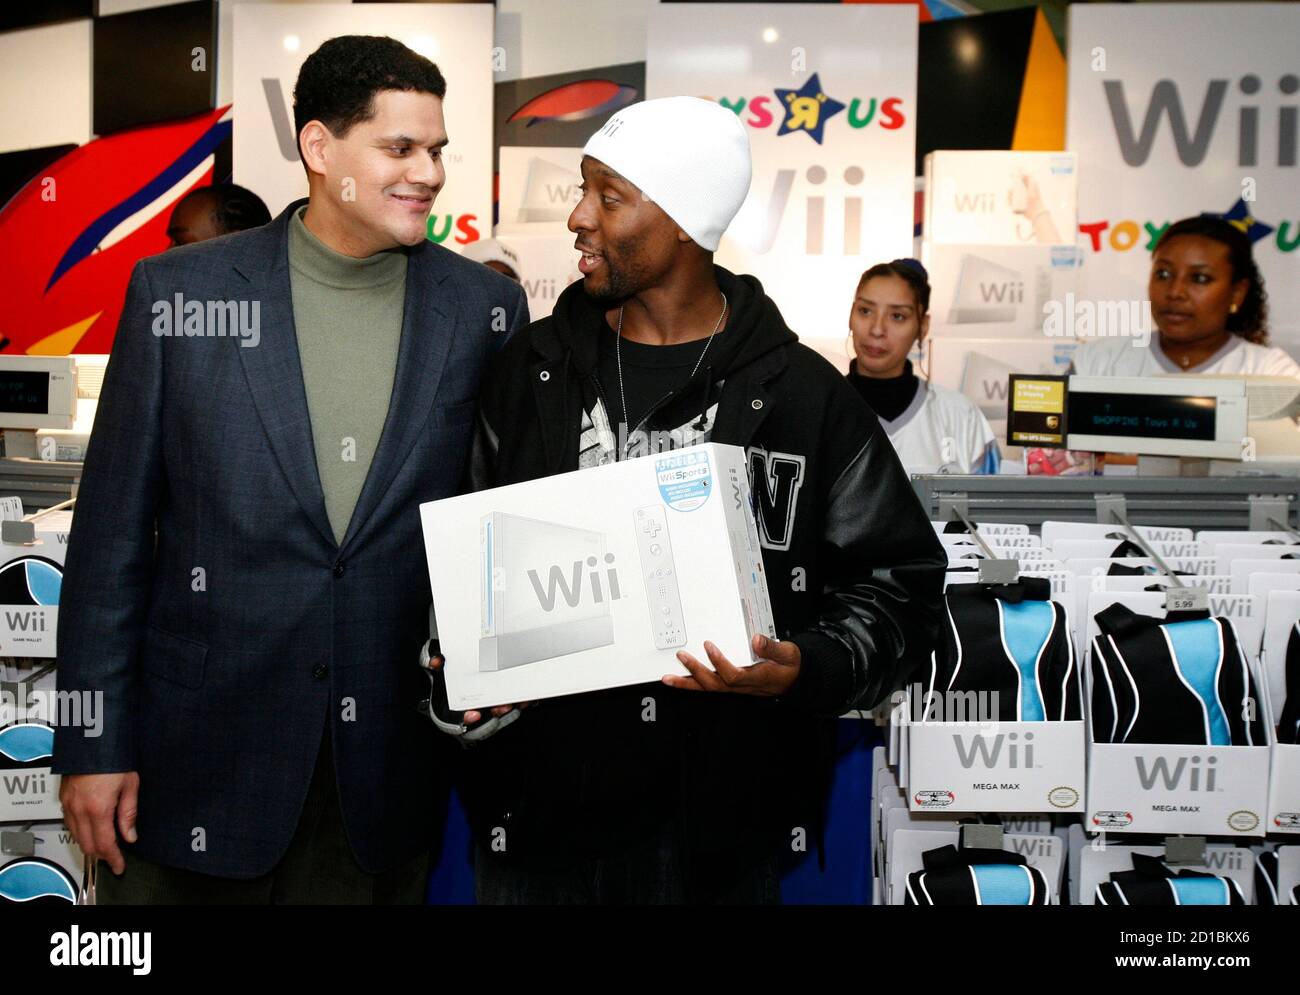 Isiah "Triforce" Johnson (R) talks with Reggie Fils-Aime, president of  Nintendo of America, after being the first customer to purchase a Nintendo  Wii video game system during the official launch of the